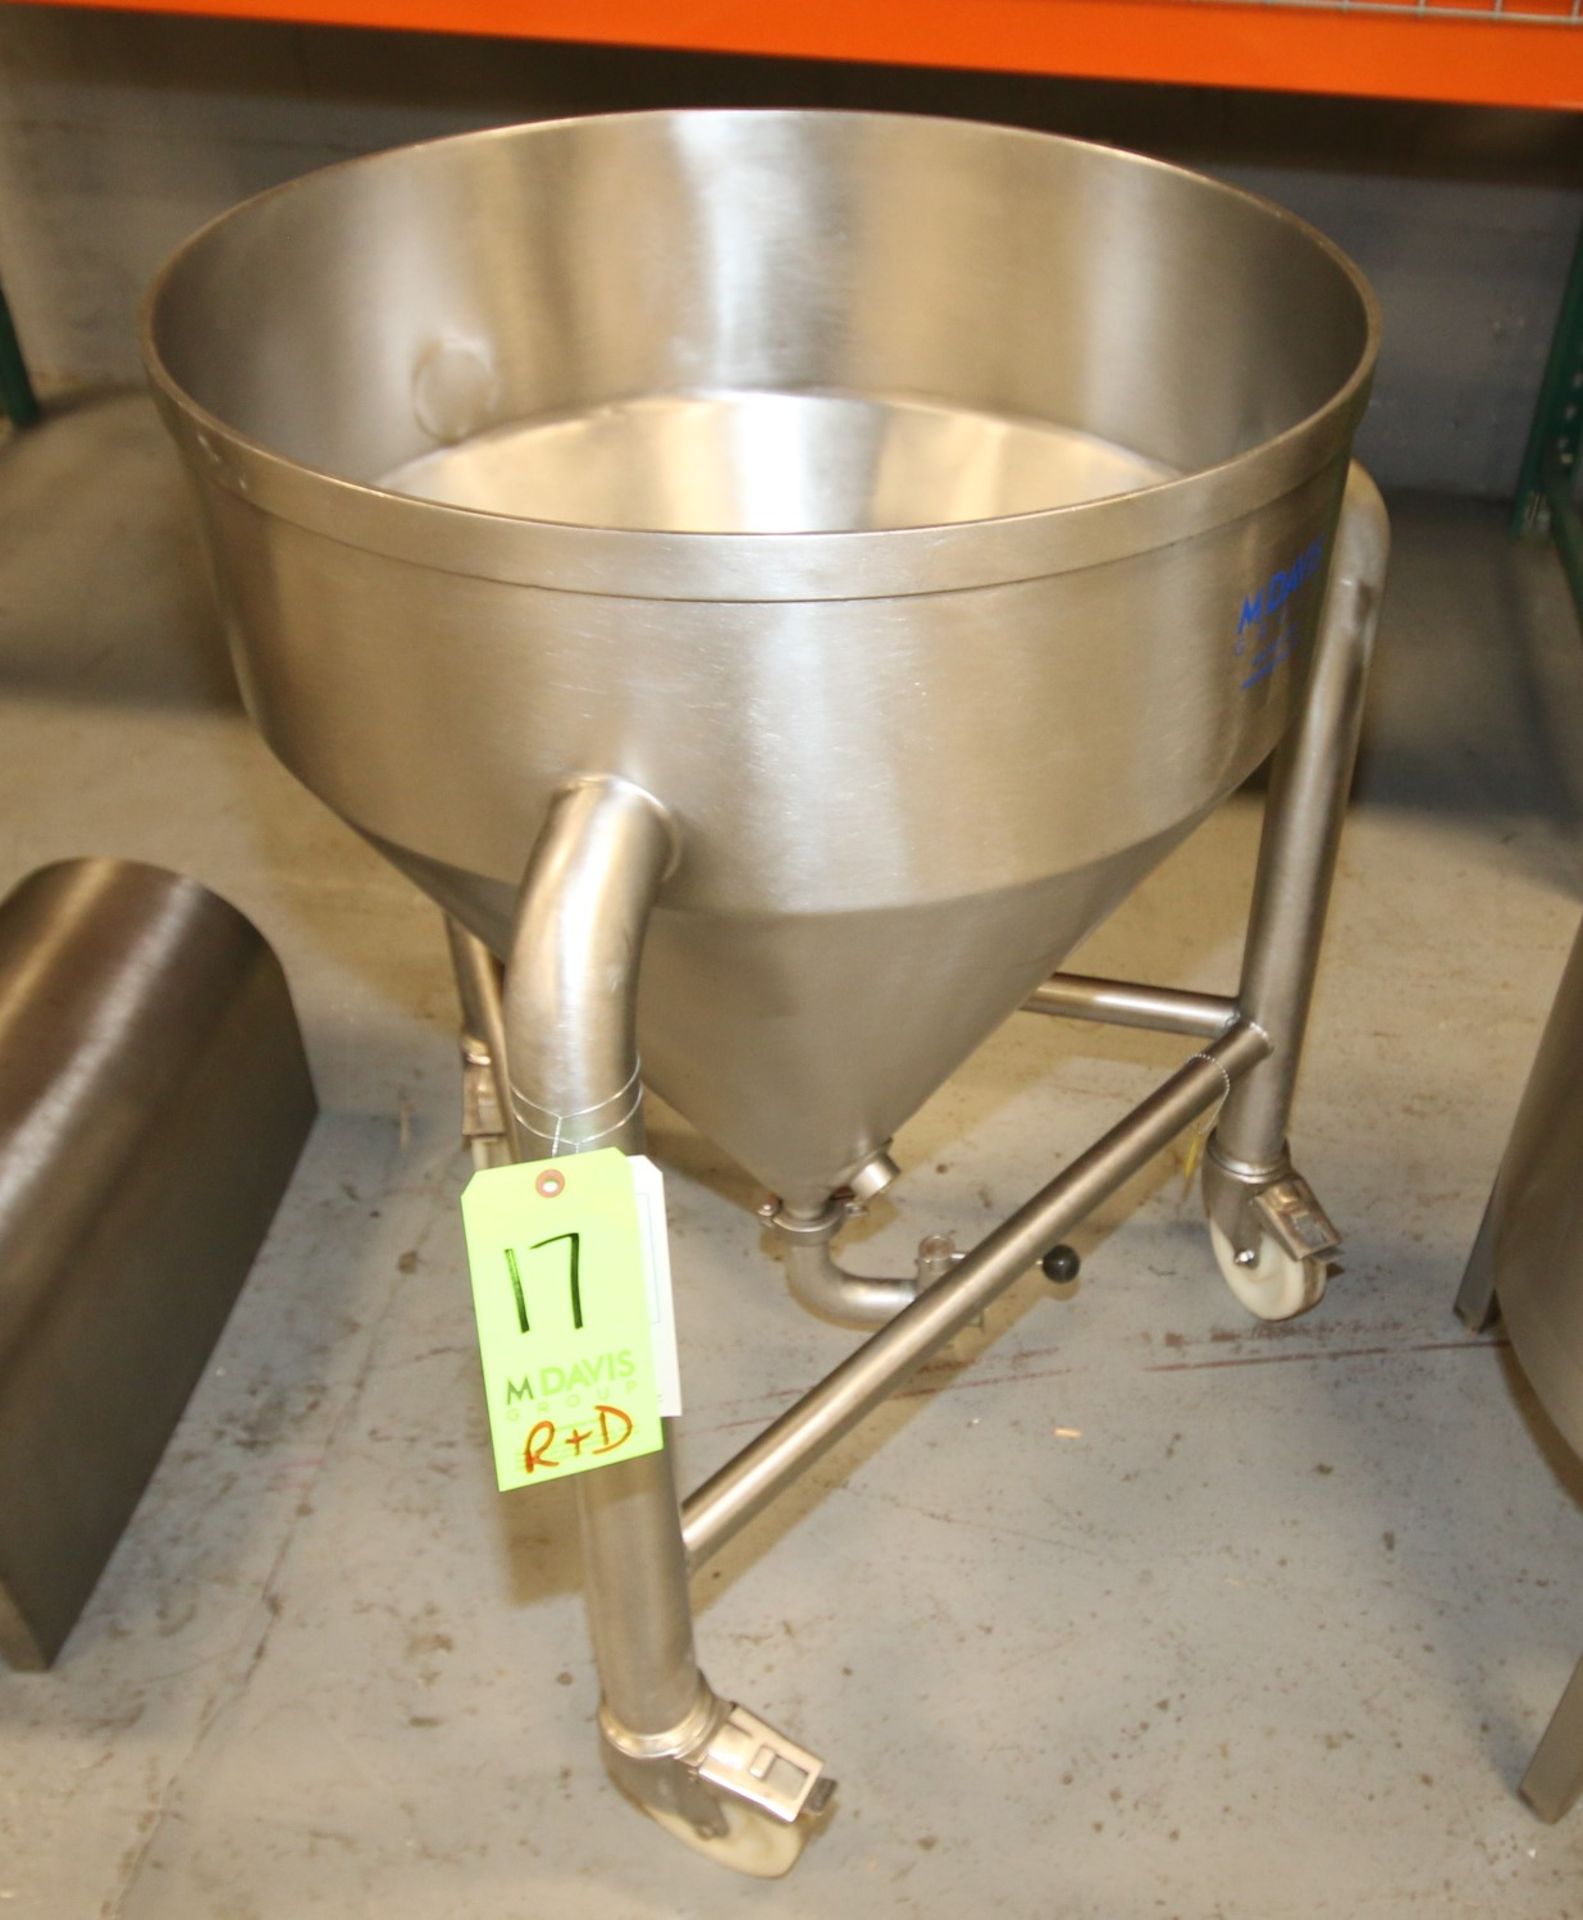 25" W x 30" D Portable S/S Funnel with Bottom 1.5" Clamp Type Connection, Mounted on Casters